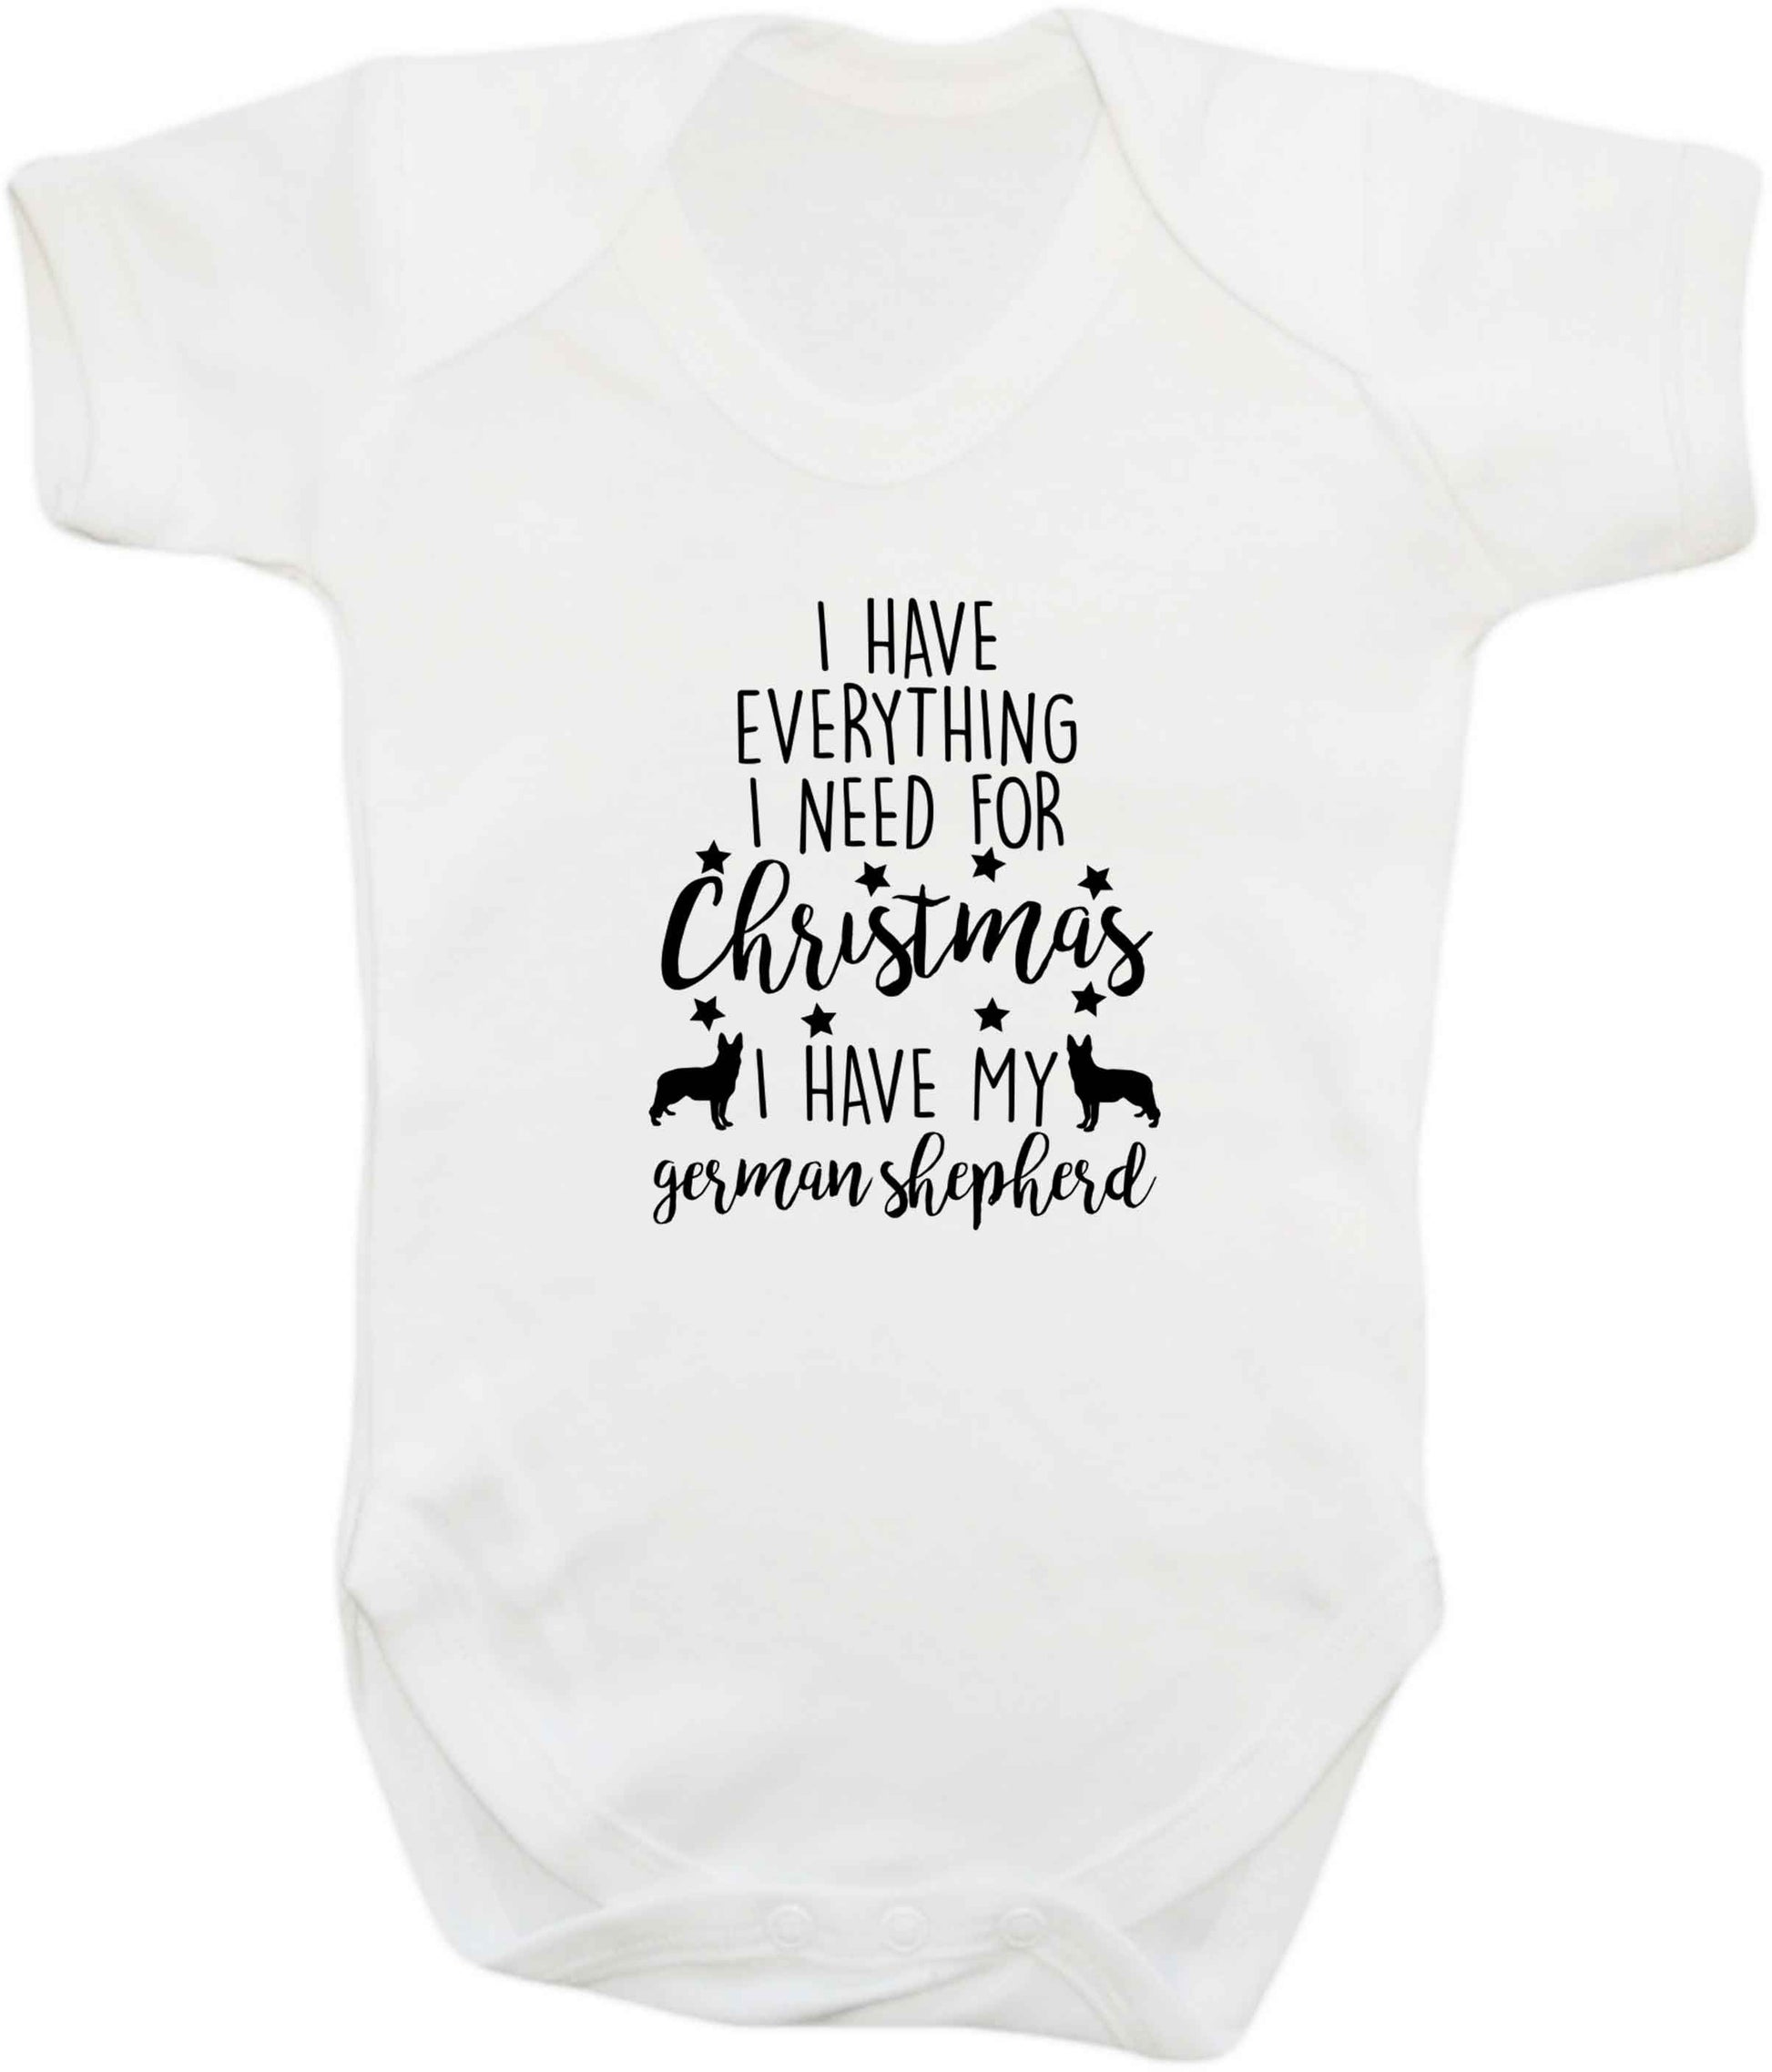 I have everything I need for Christmas I have my german shepherd baby vest white 18-24 months